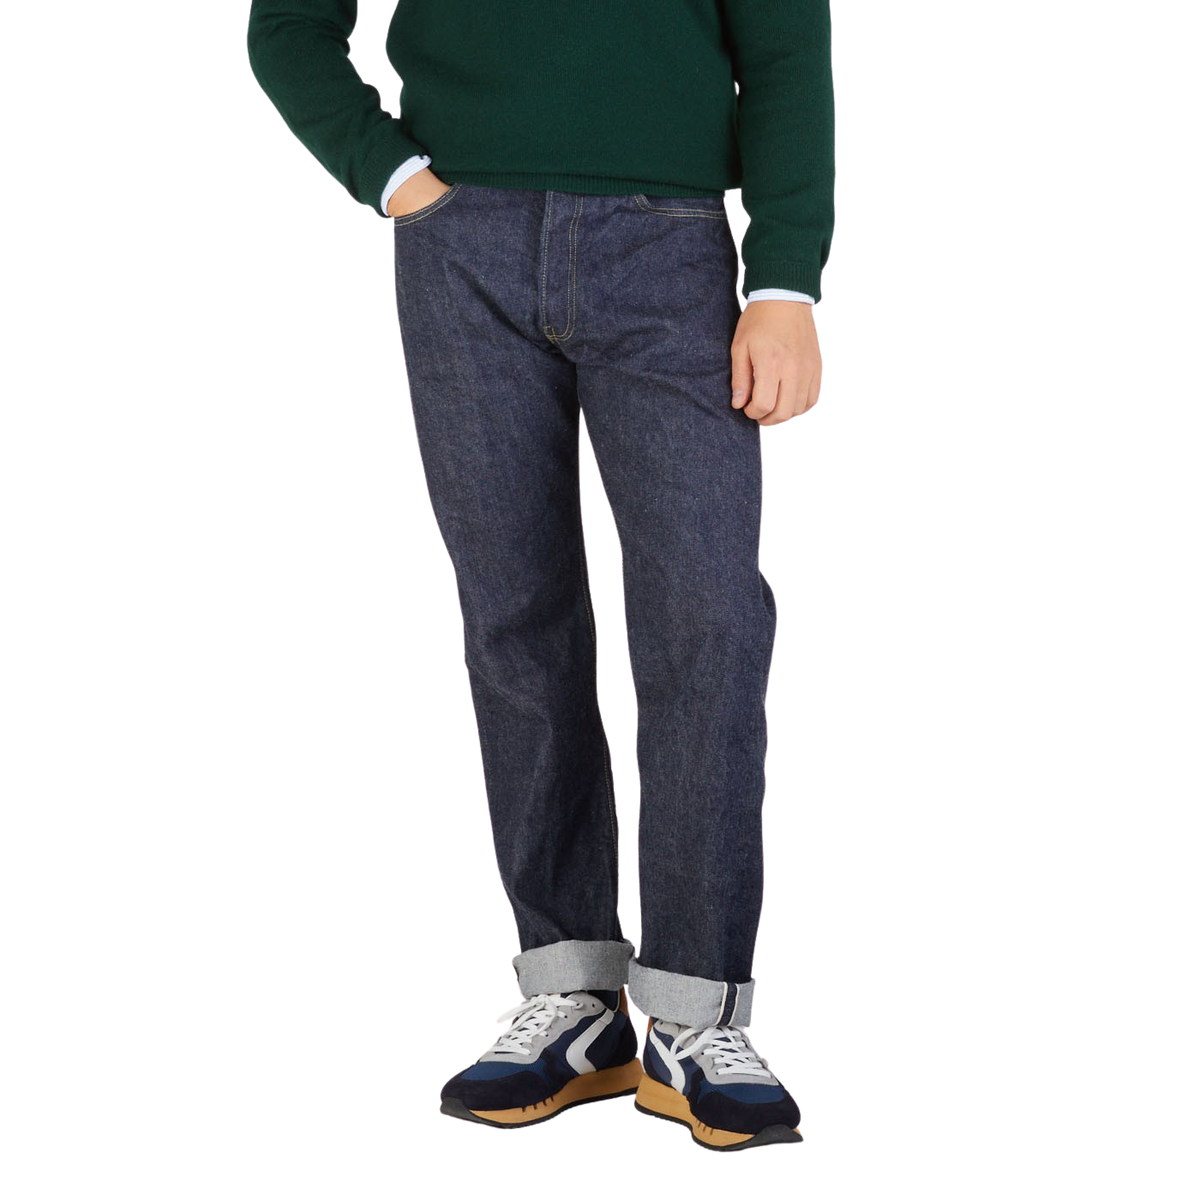 A person wearing Resolute dark blue selvedge denim jeans, a green sweater, and multicolored sneakers stands against a plain background, showing a side profile from waist to feet.